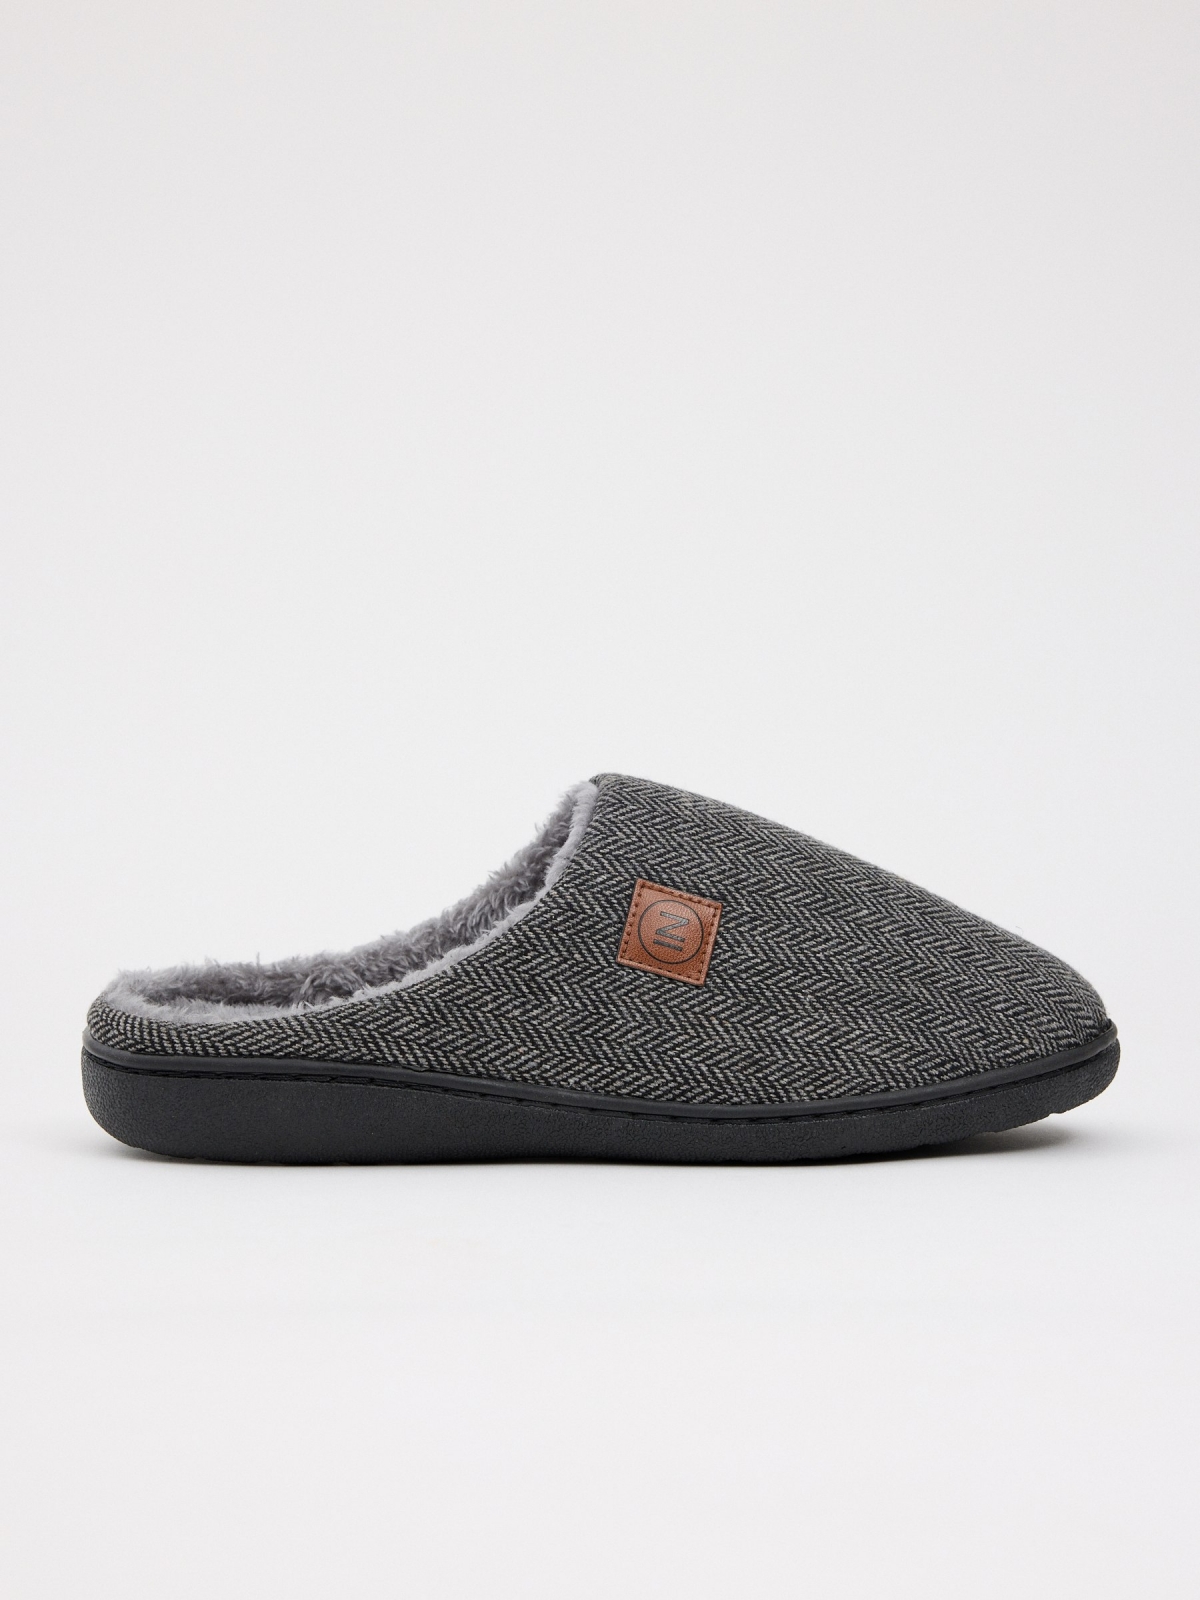 Fur lined house slippers dark grey middle front view